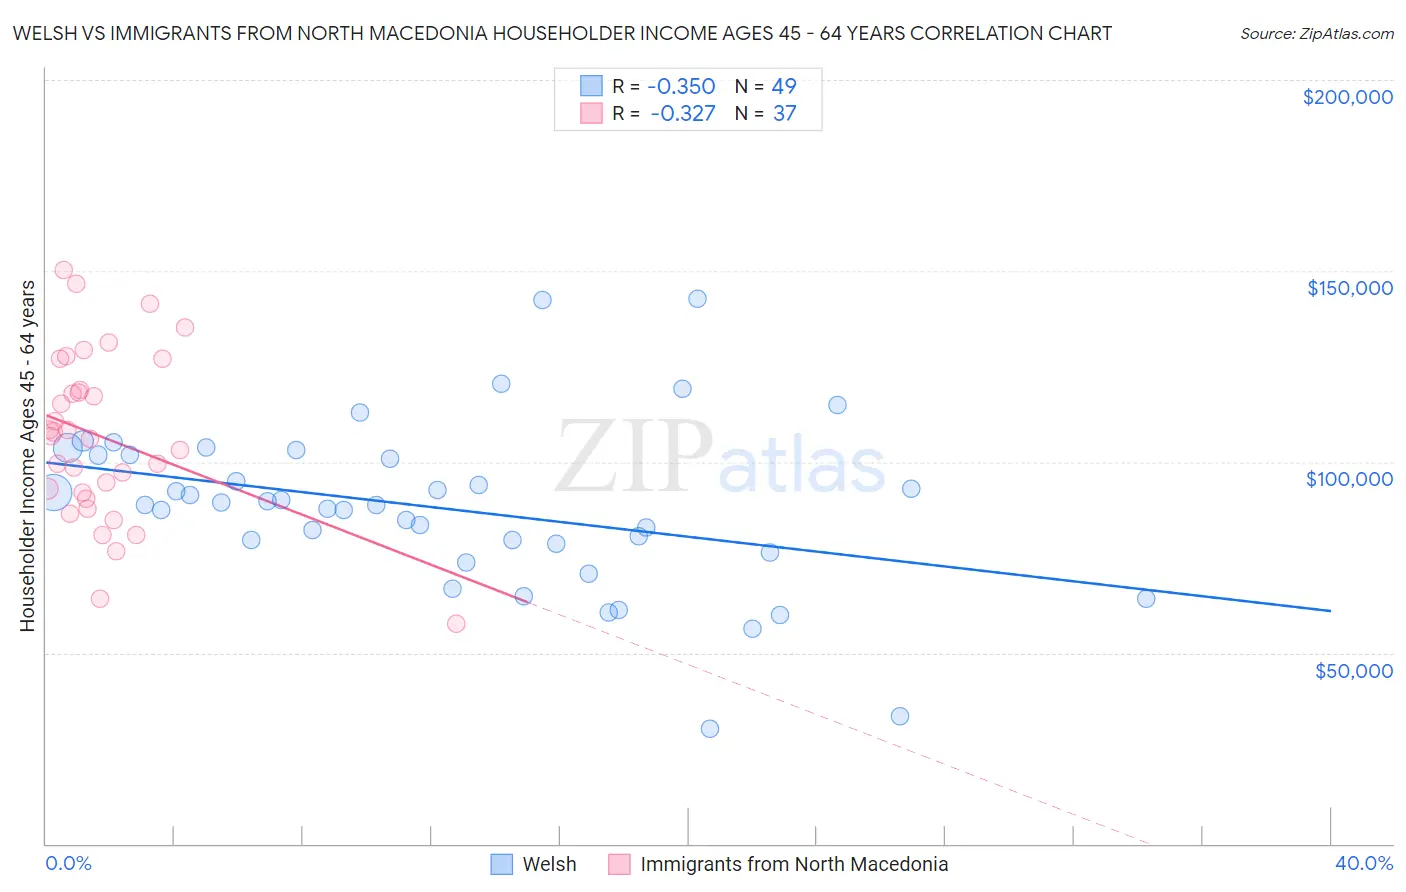 Welsh vs Immigrants from North Macedonia Householder Income Ages 45 - 64 years